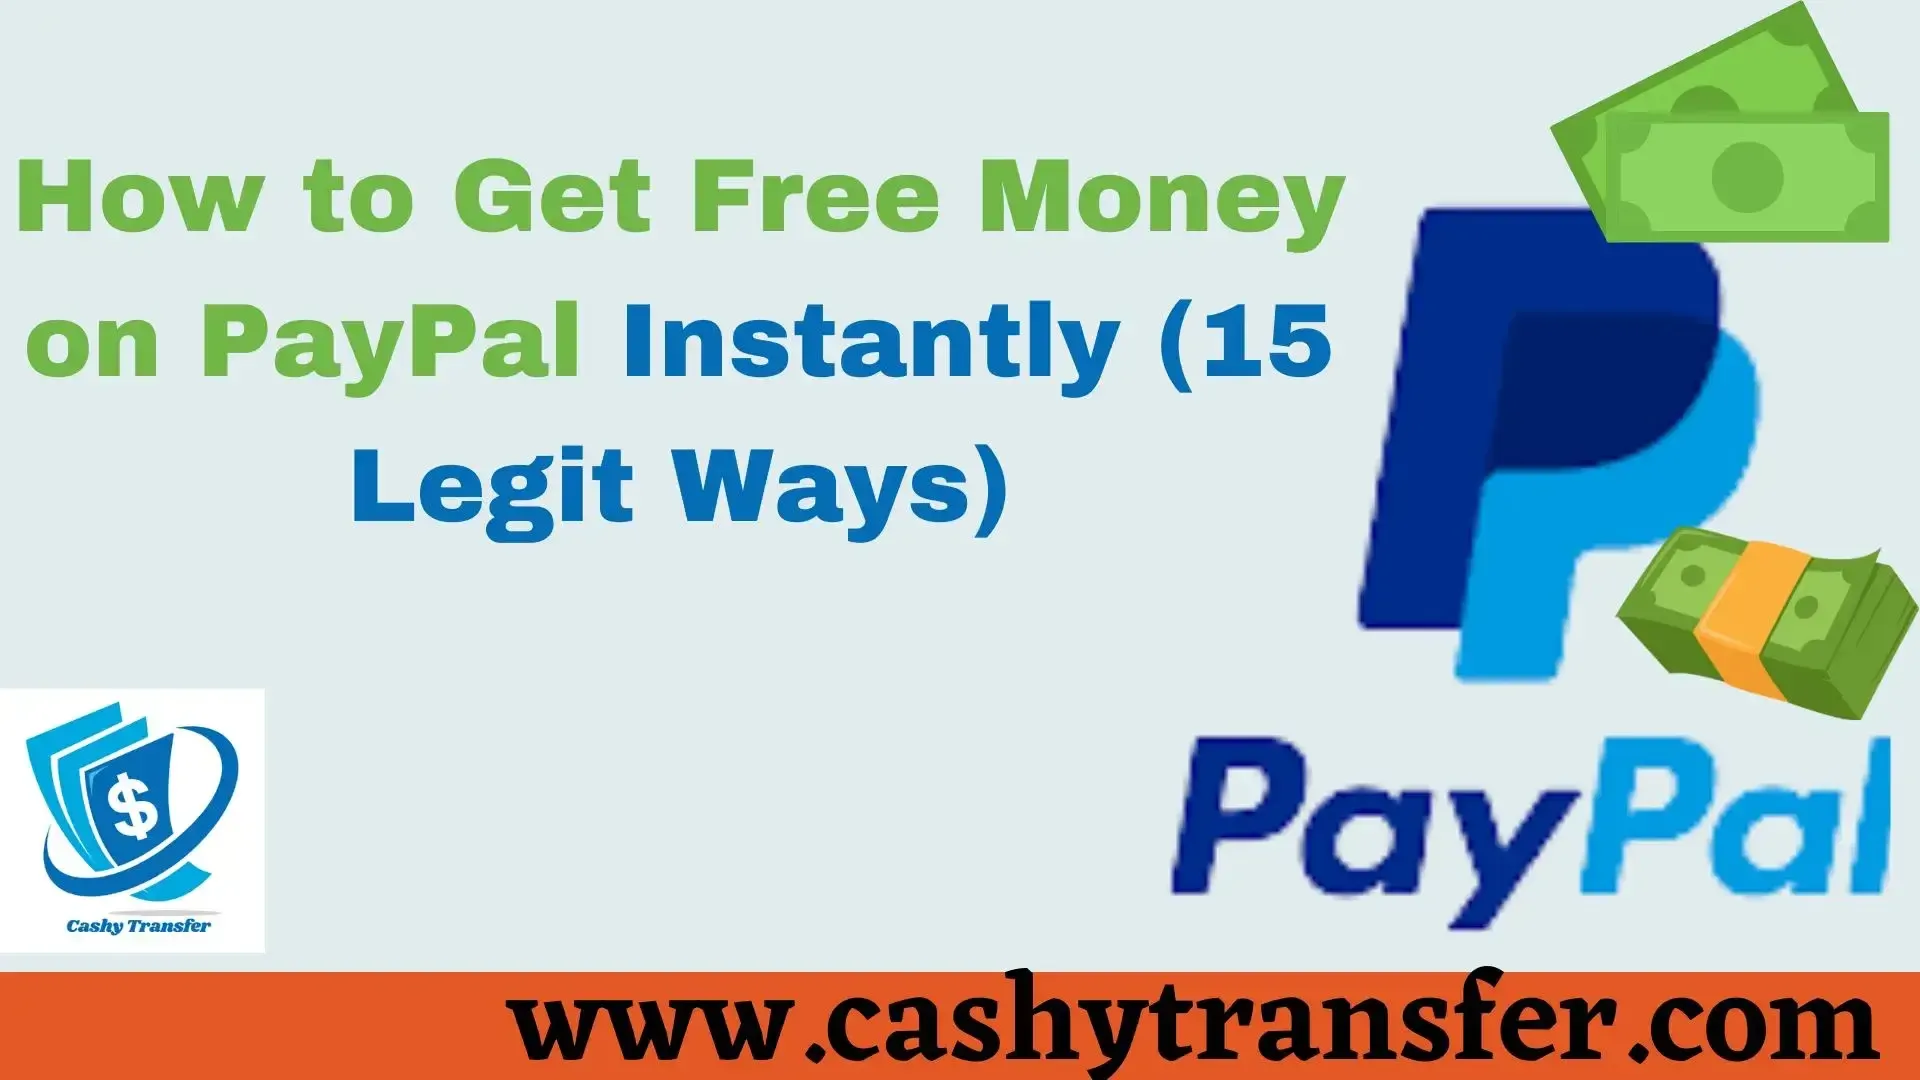 Get Free Money on PayPal